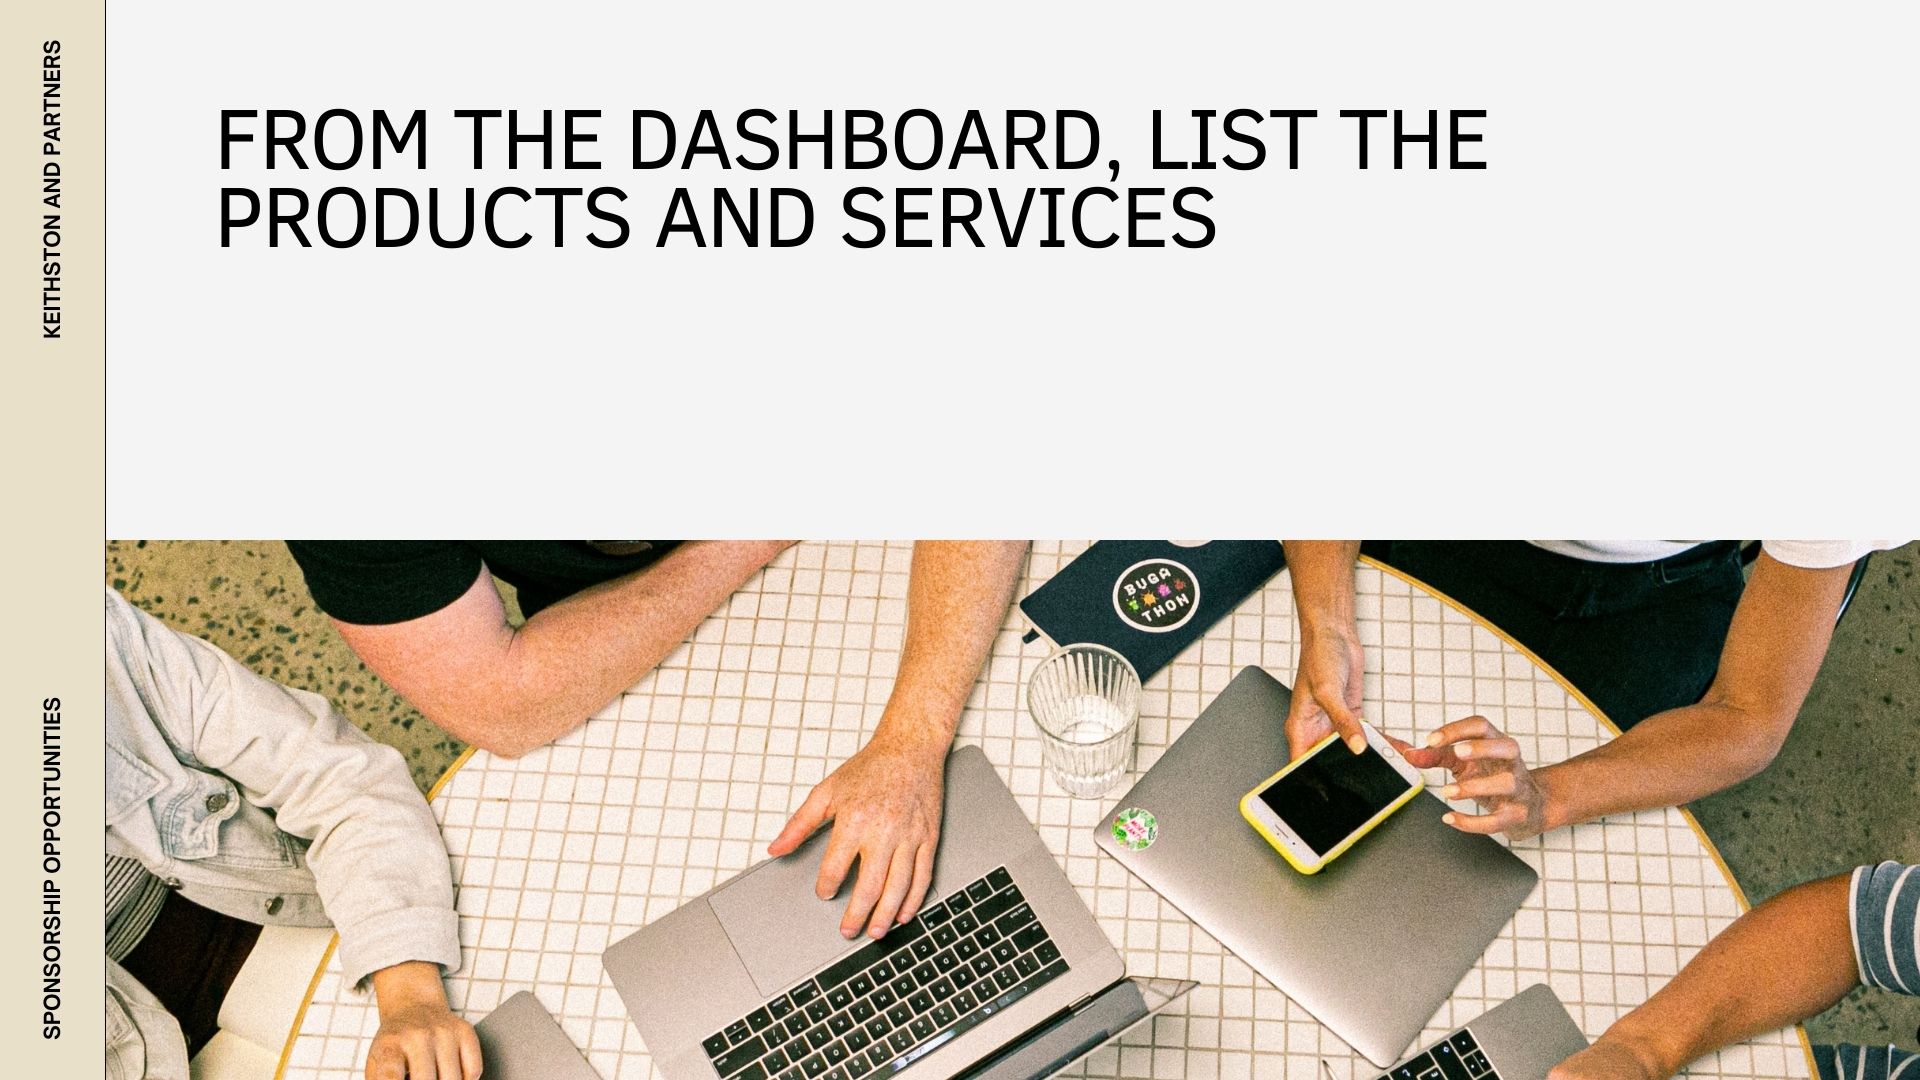 From the dashboard, list the products and services